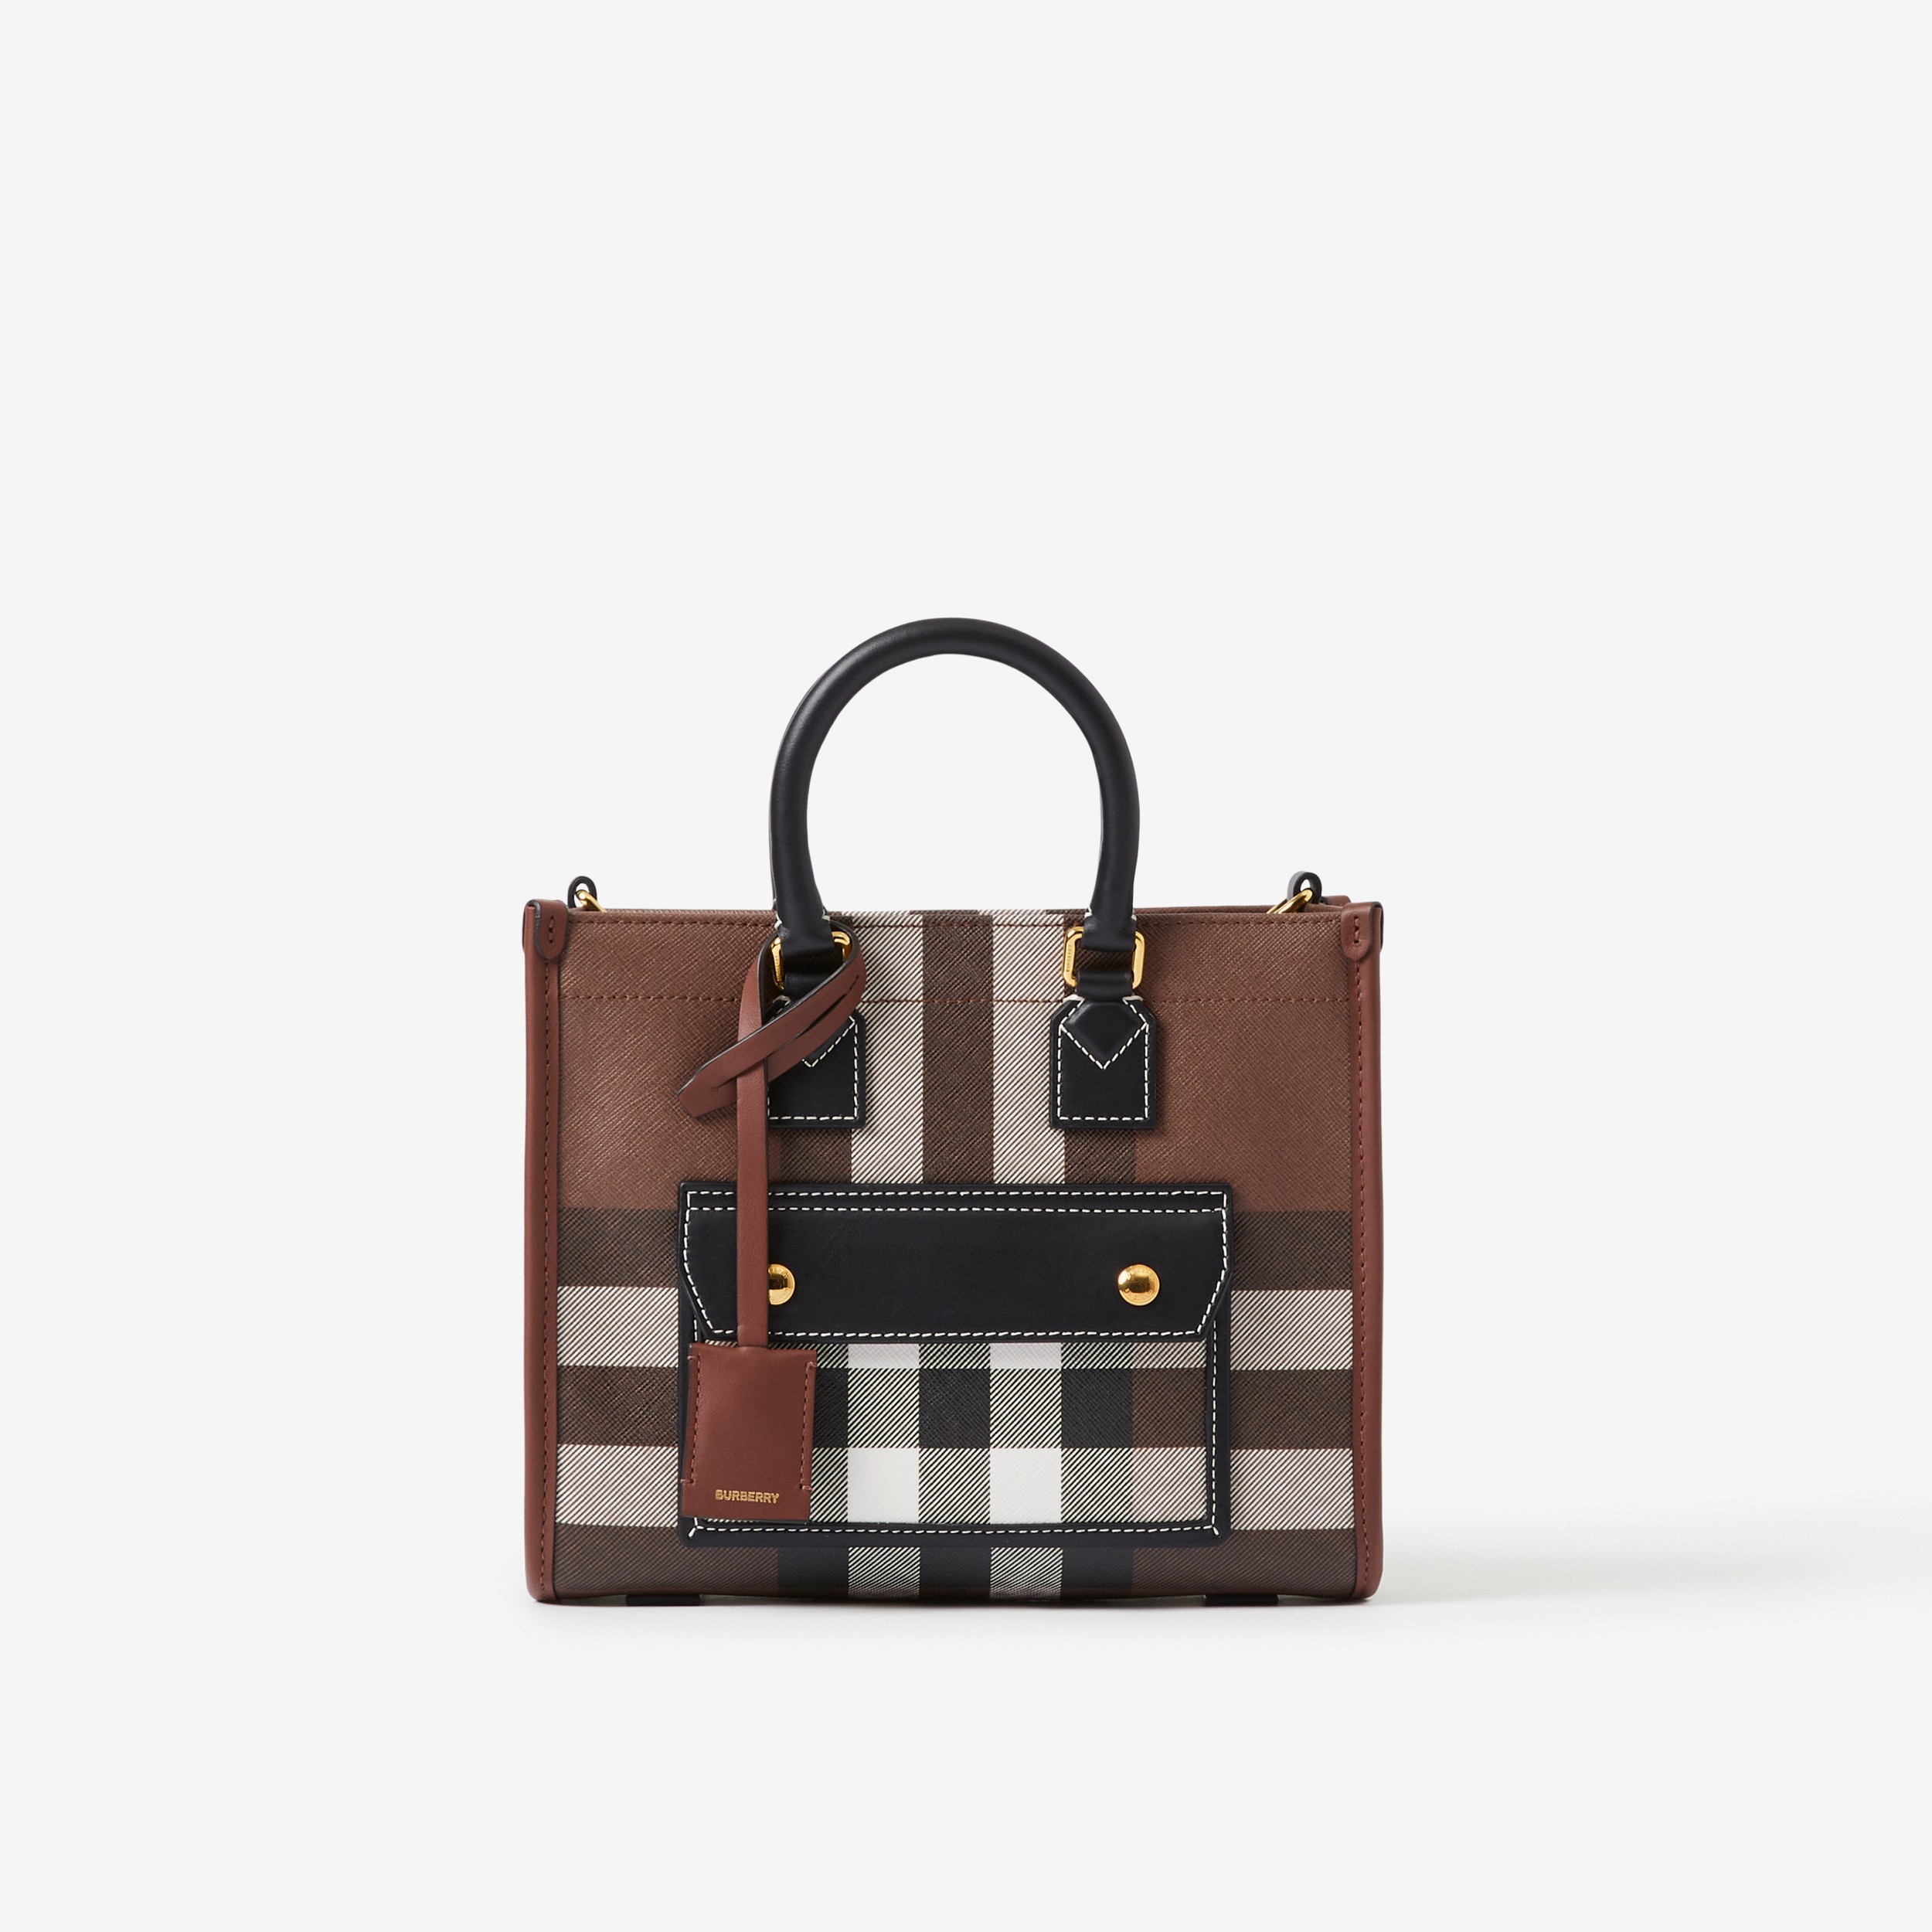 Minibolso tote Freya (Marrón Abedul Oscuro) - Mujer | Burberry® oficial - 1